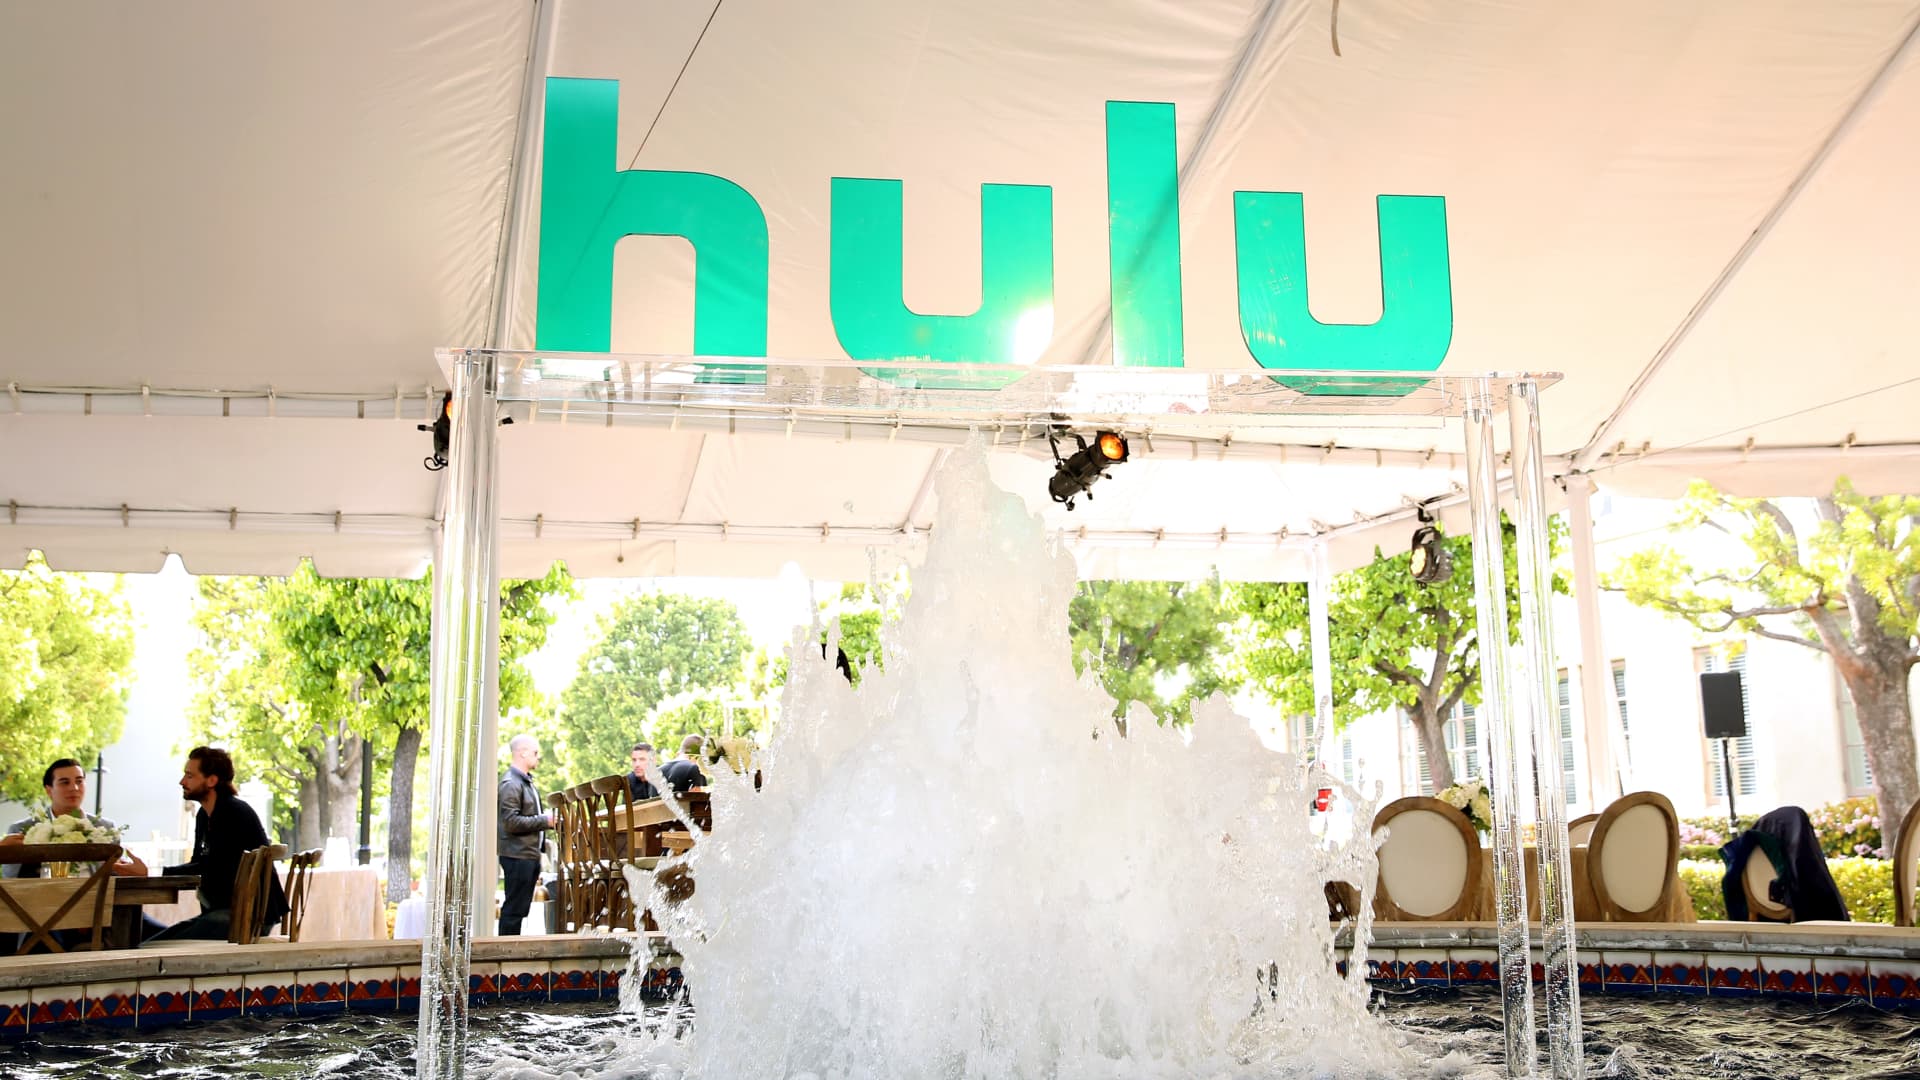 Hulu faces existential crisis as Disney decides how to move forward